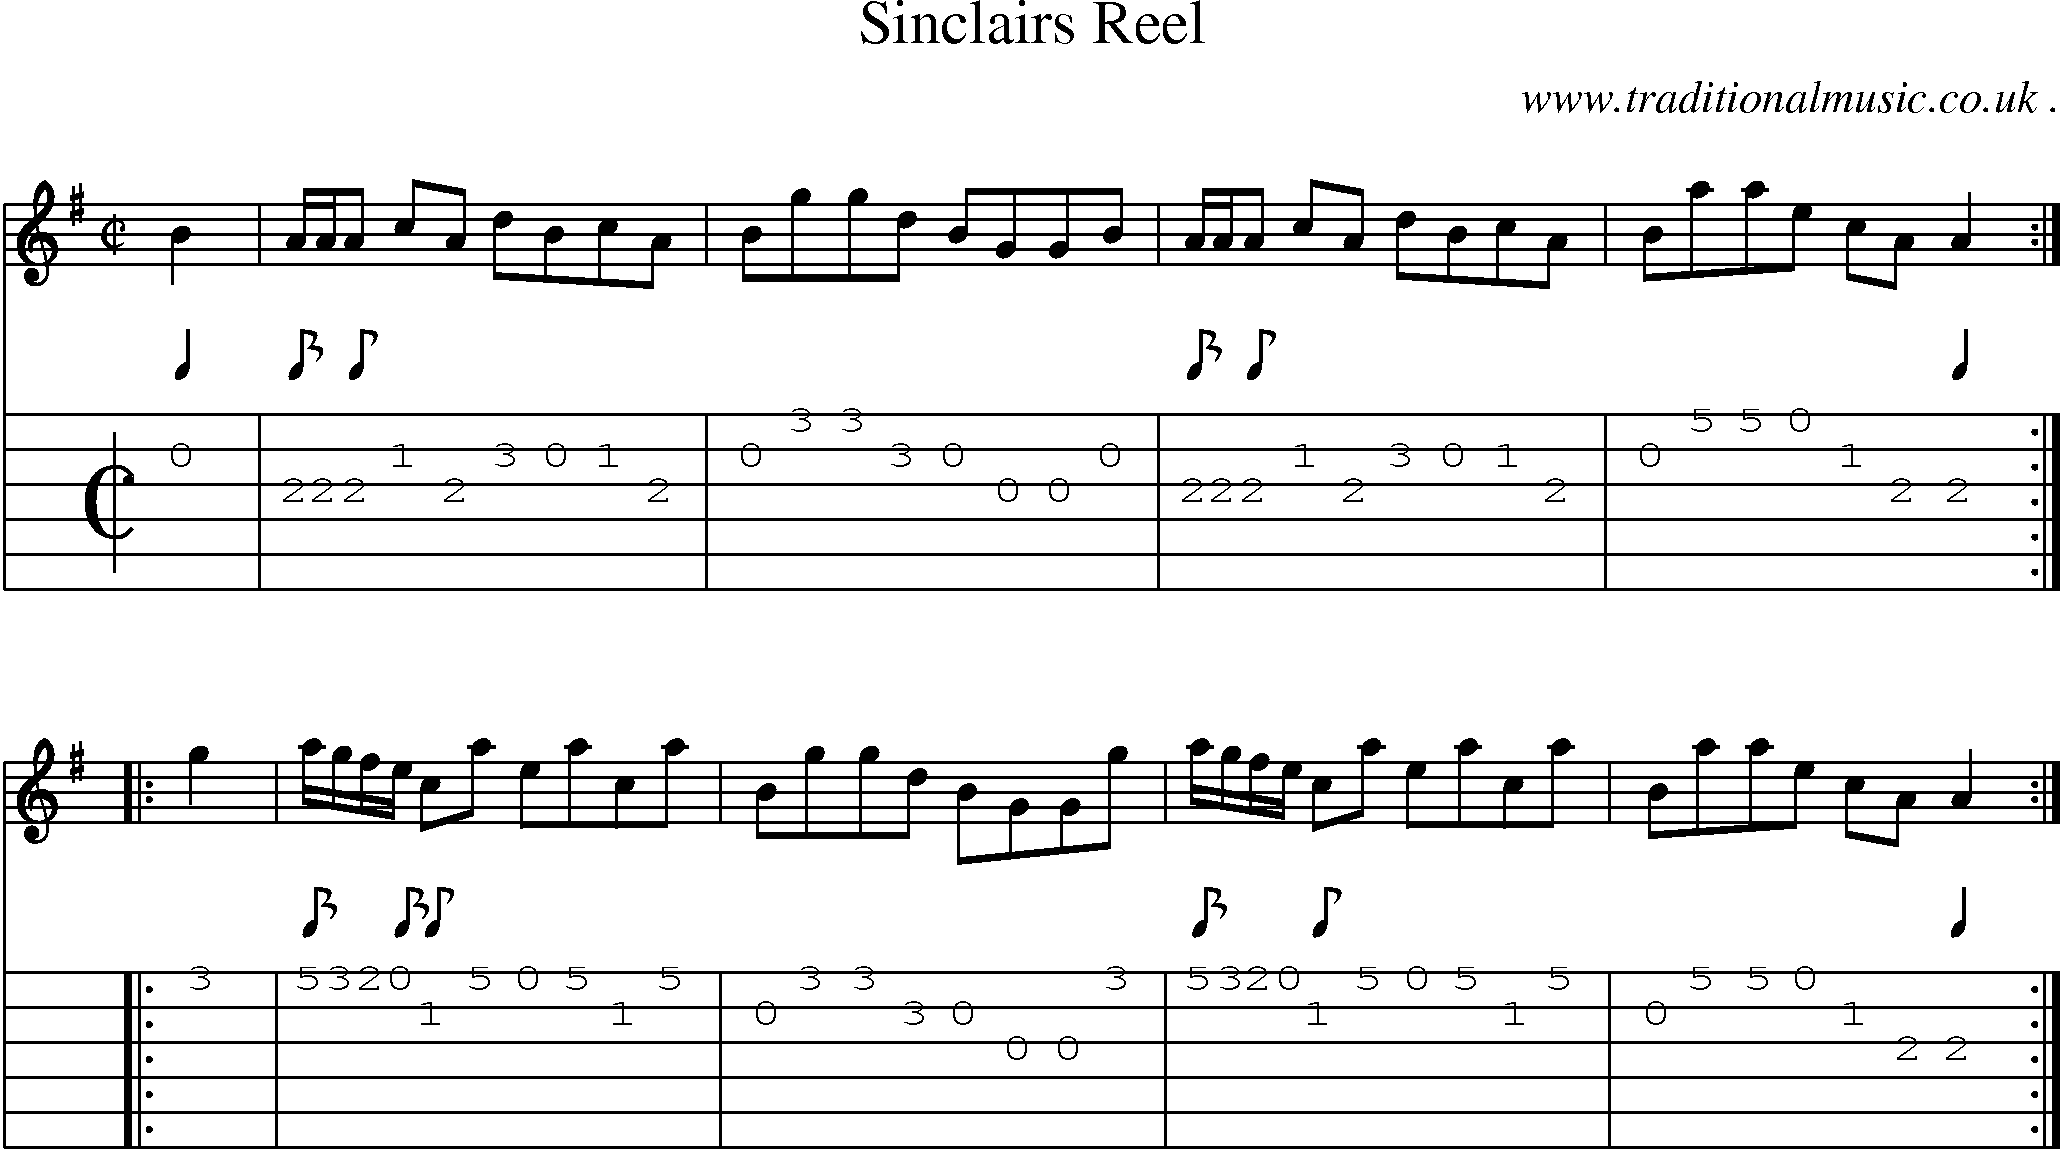 Sheet-Music and Guitar Tabs for Sinclairs Reel